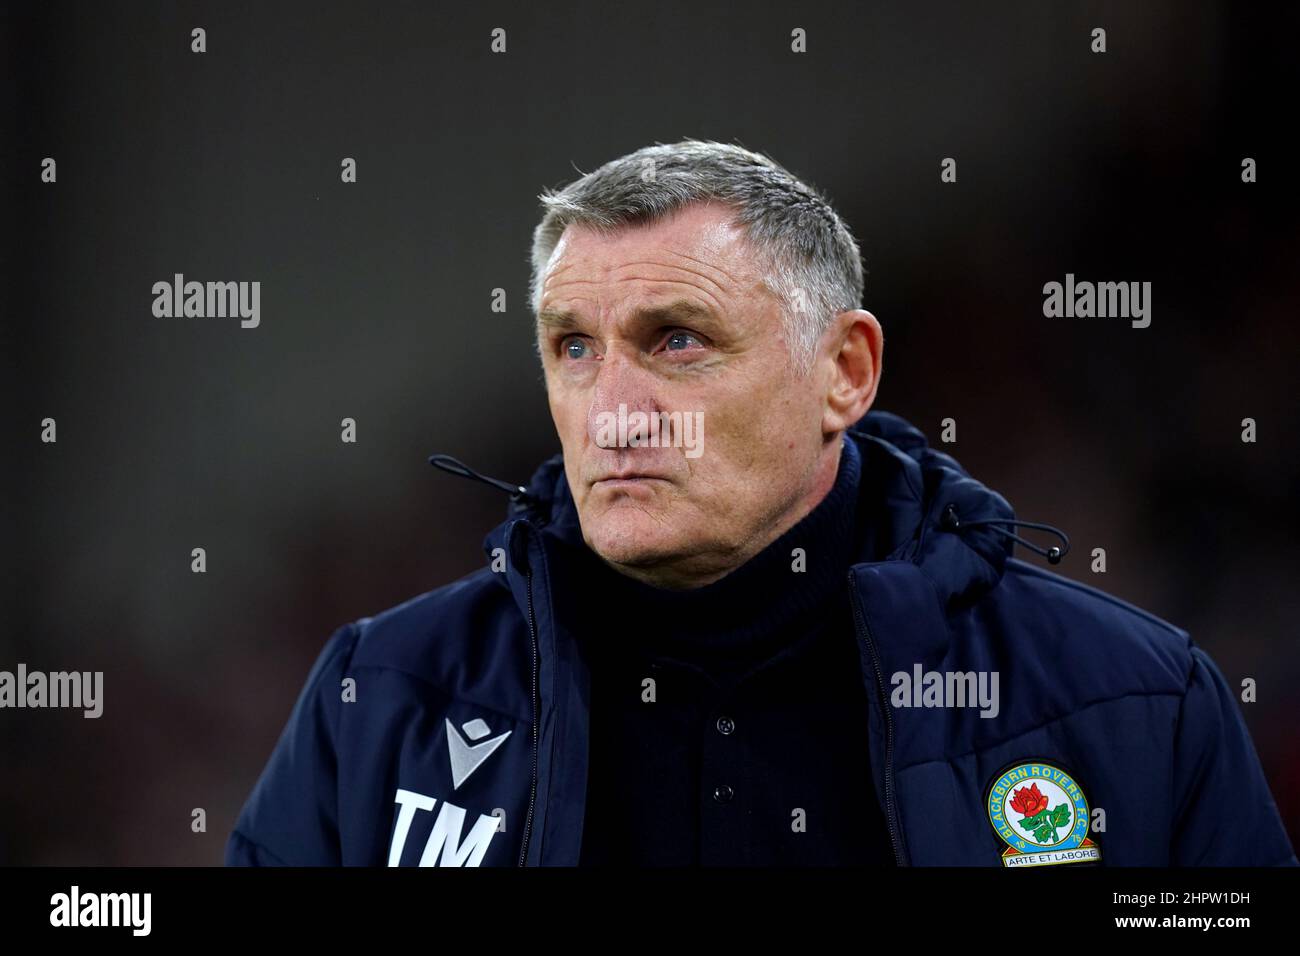 Blackburn Rovers manager Tony Mowbray during the Sky Bet Championship match at Bramall Lane, Sheffield. Picture date: Wednesday February 23, 2022. Stock Photo